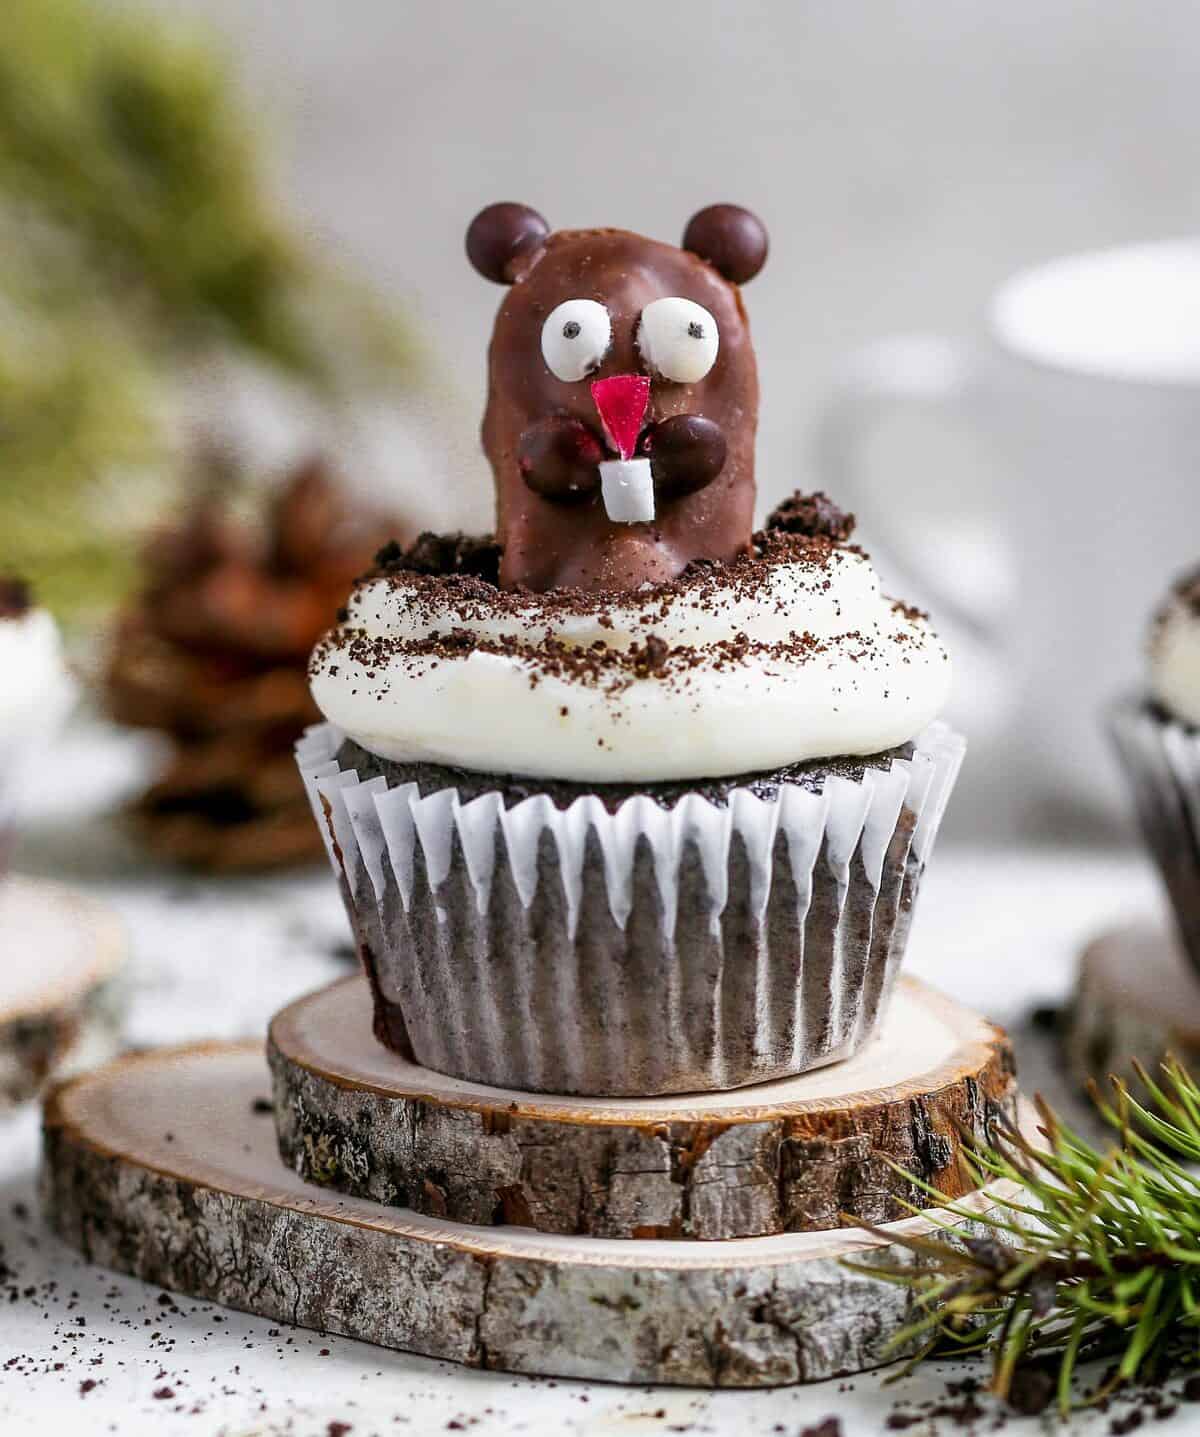  Winter might not be over, but these cupcakes will bring some warmth to your kitchen.